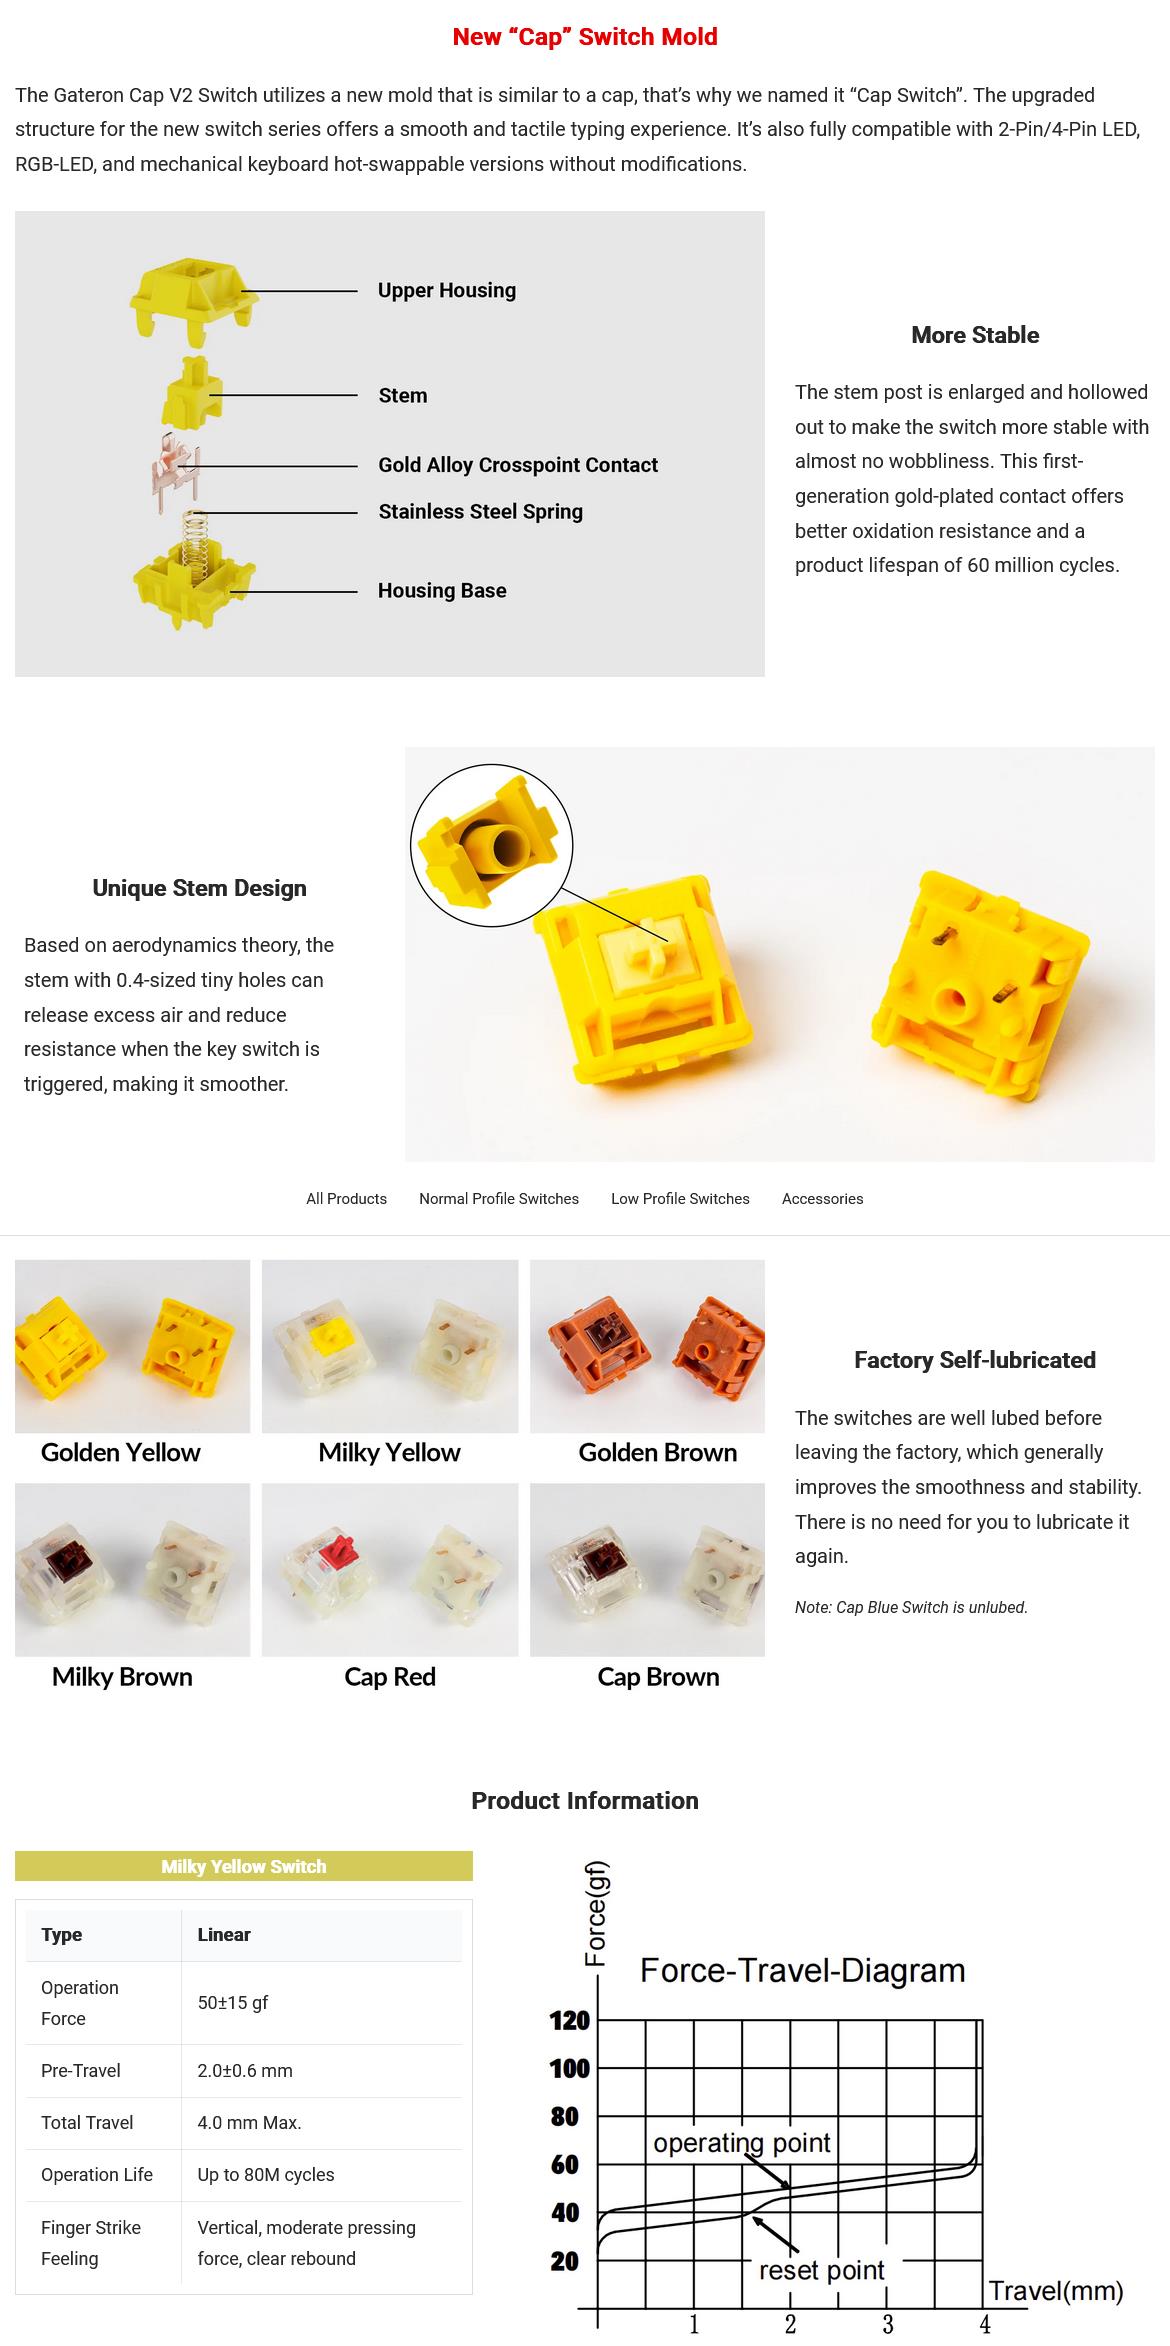 A large marketing image providing additional information about the product Keychron Gateron Cap Milky Yellow V2 Switch Set (50g Linear) 110pcs - Additional alt info not provided